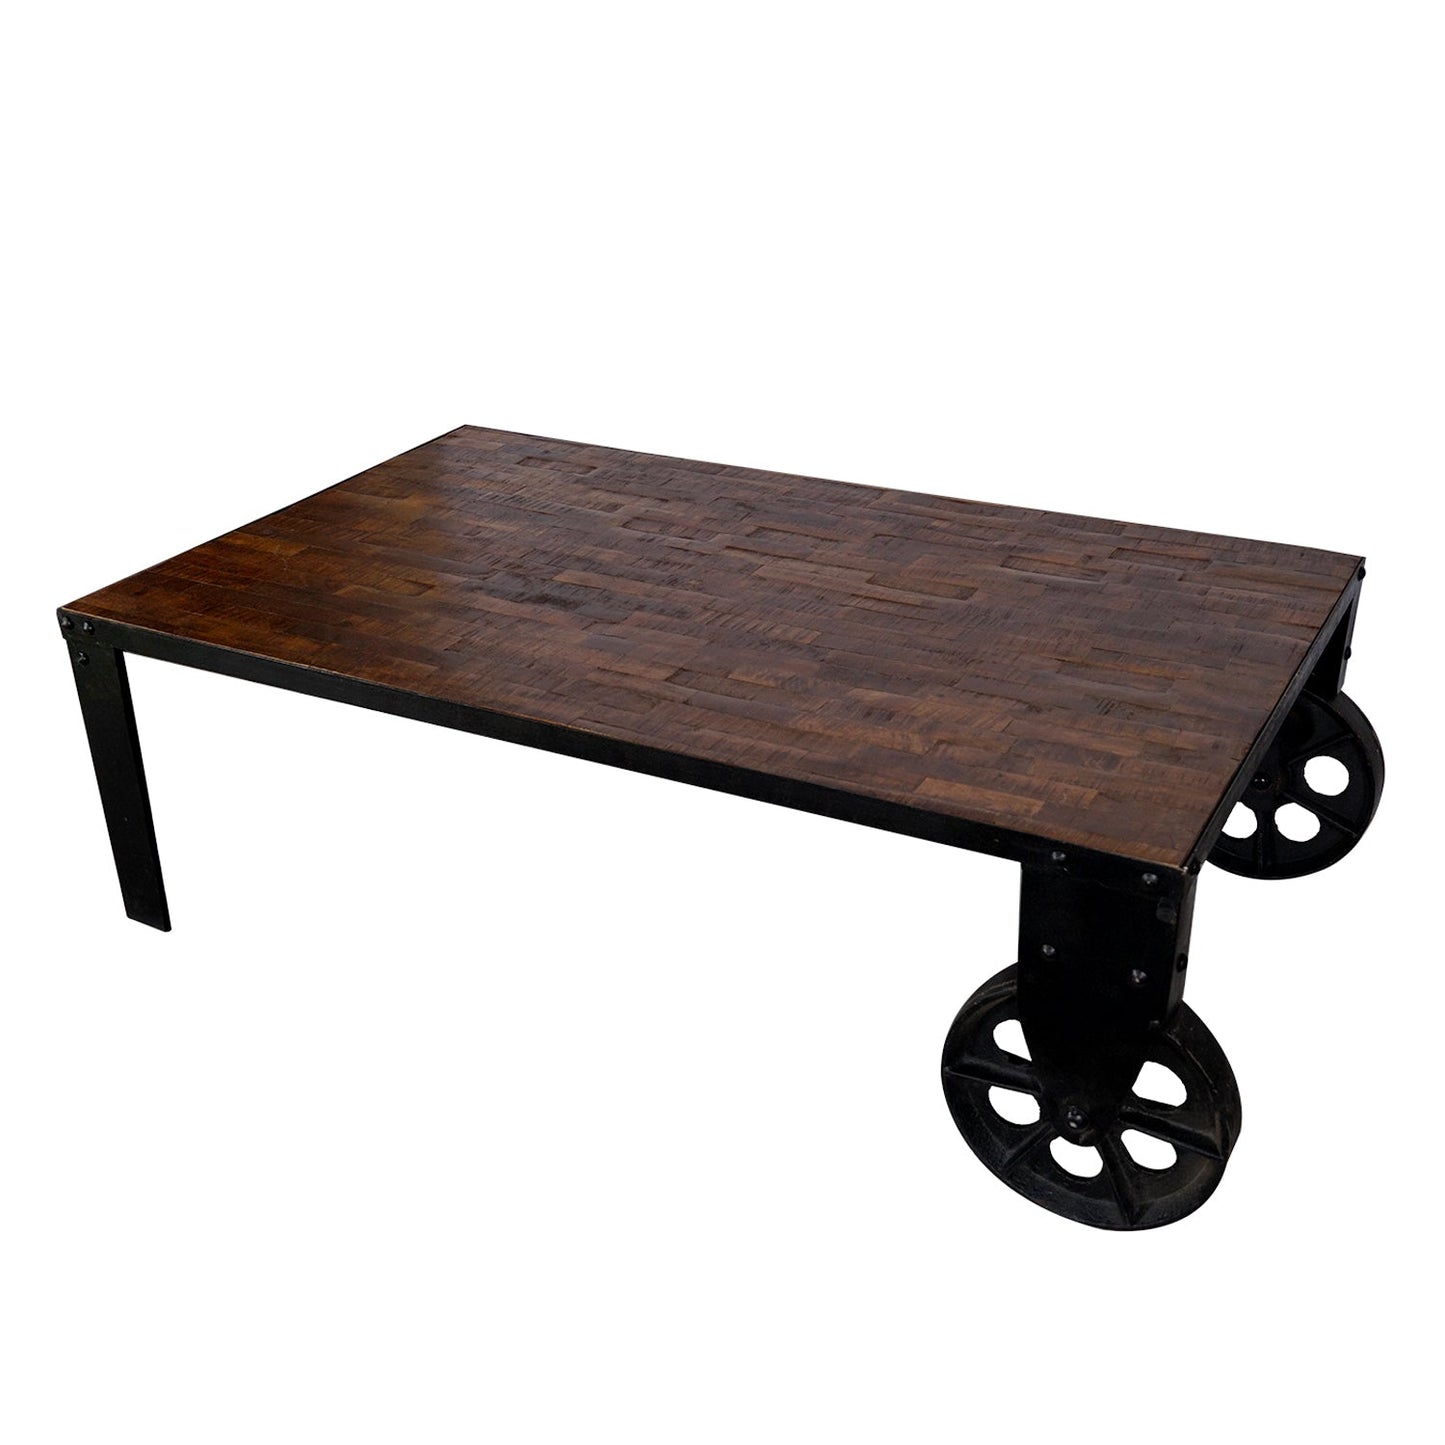 Rustic Industrial Cart Style Coffee Table with 2 wheels - Stylla London